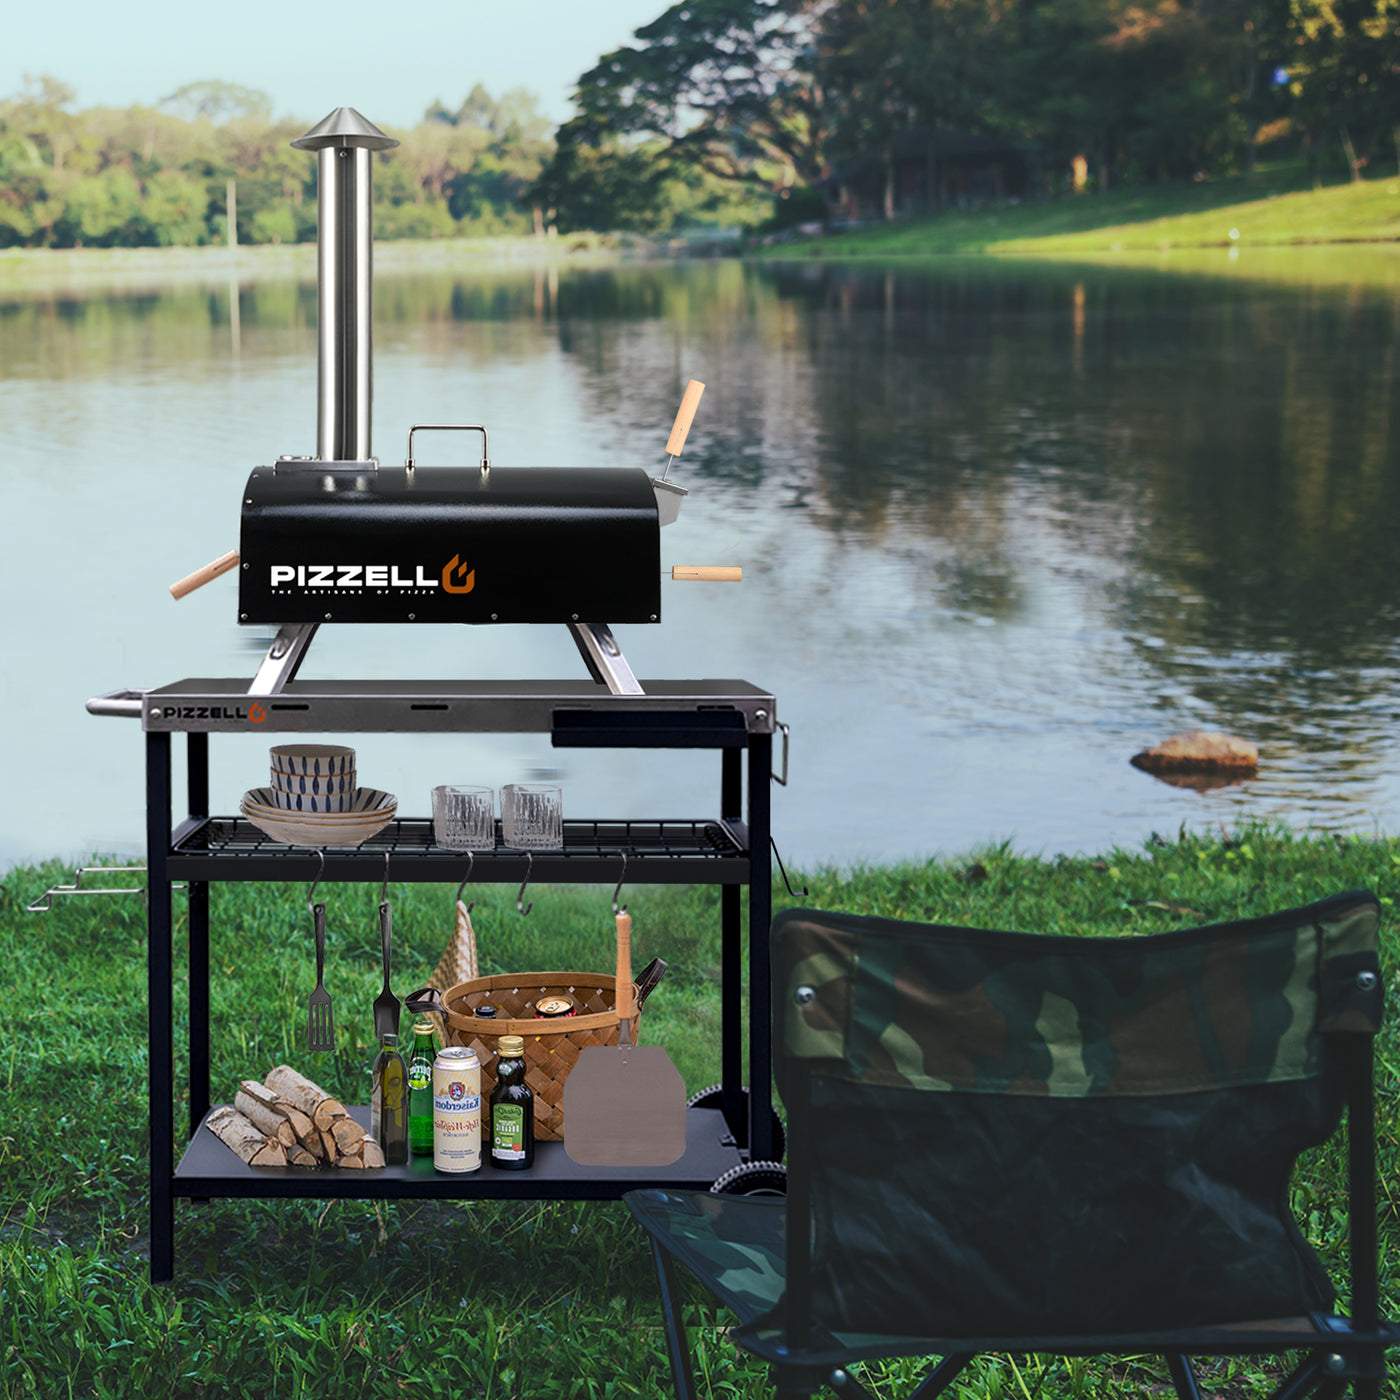 Outdoor Pizzello Forte - Outdoor Wood Fired Pizza Oven by a lakeside with a stainless steel pizza peel, and ingredients on a clear day.